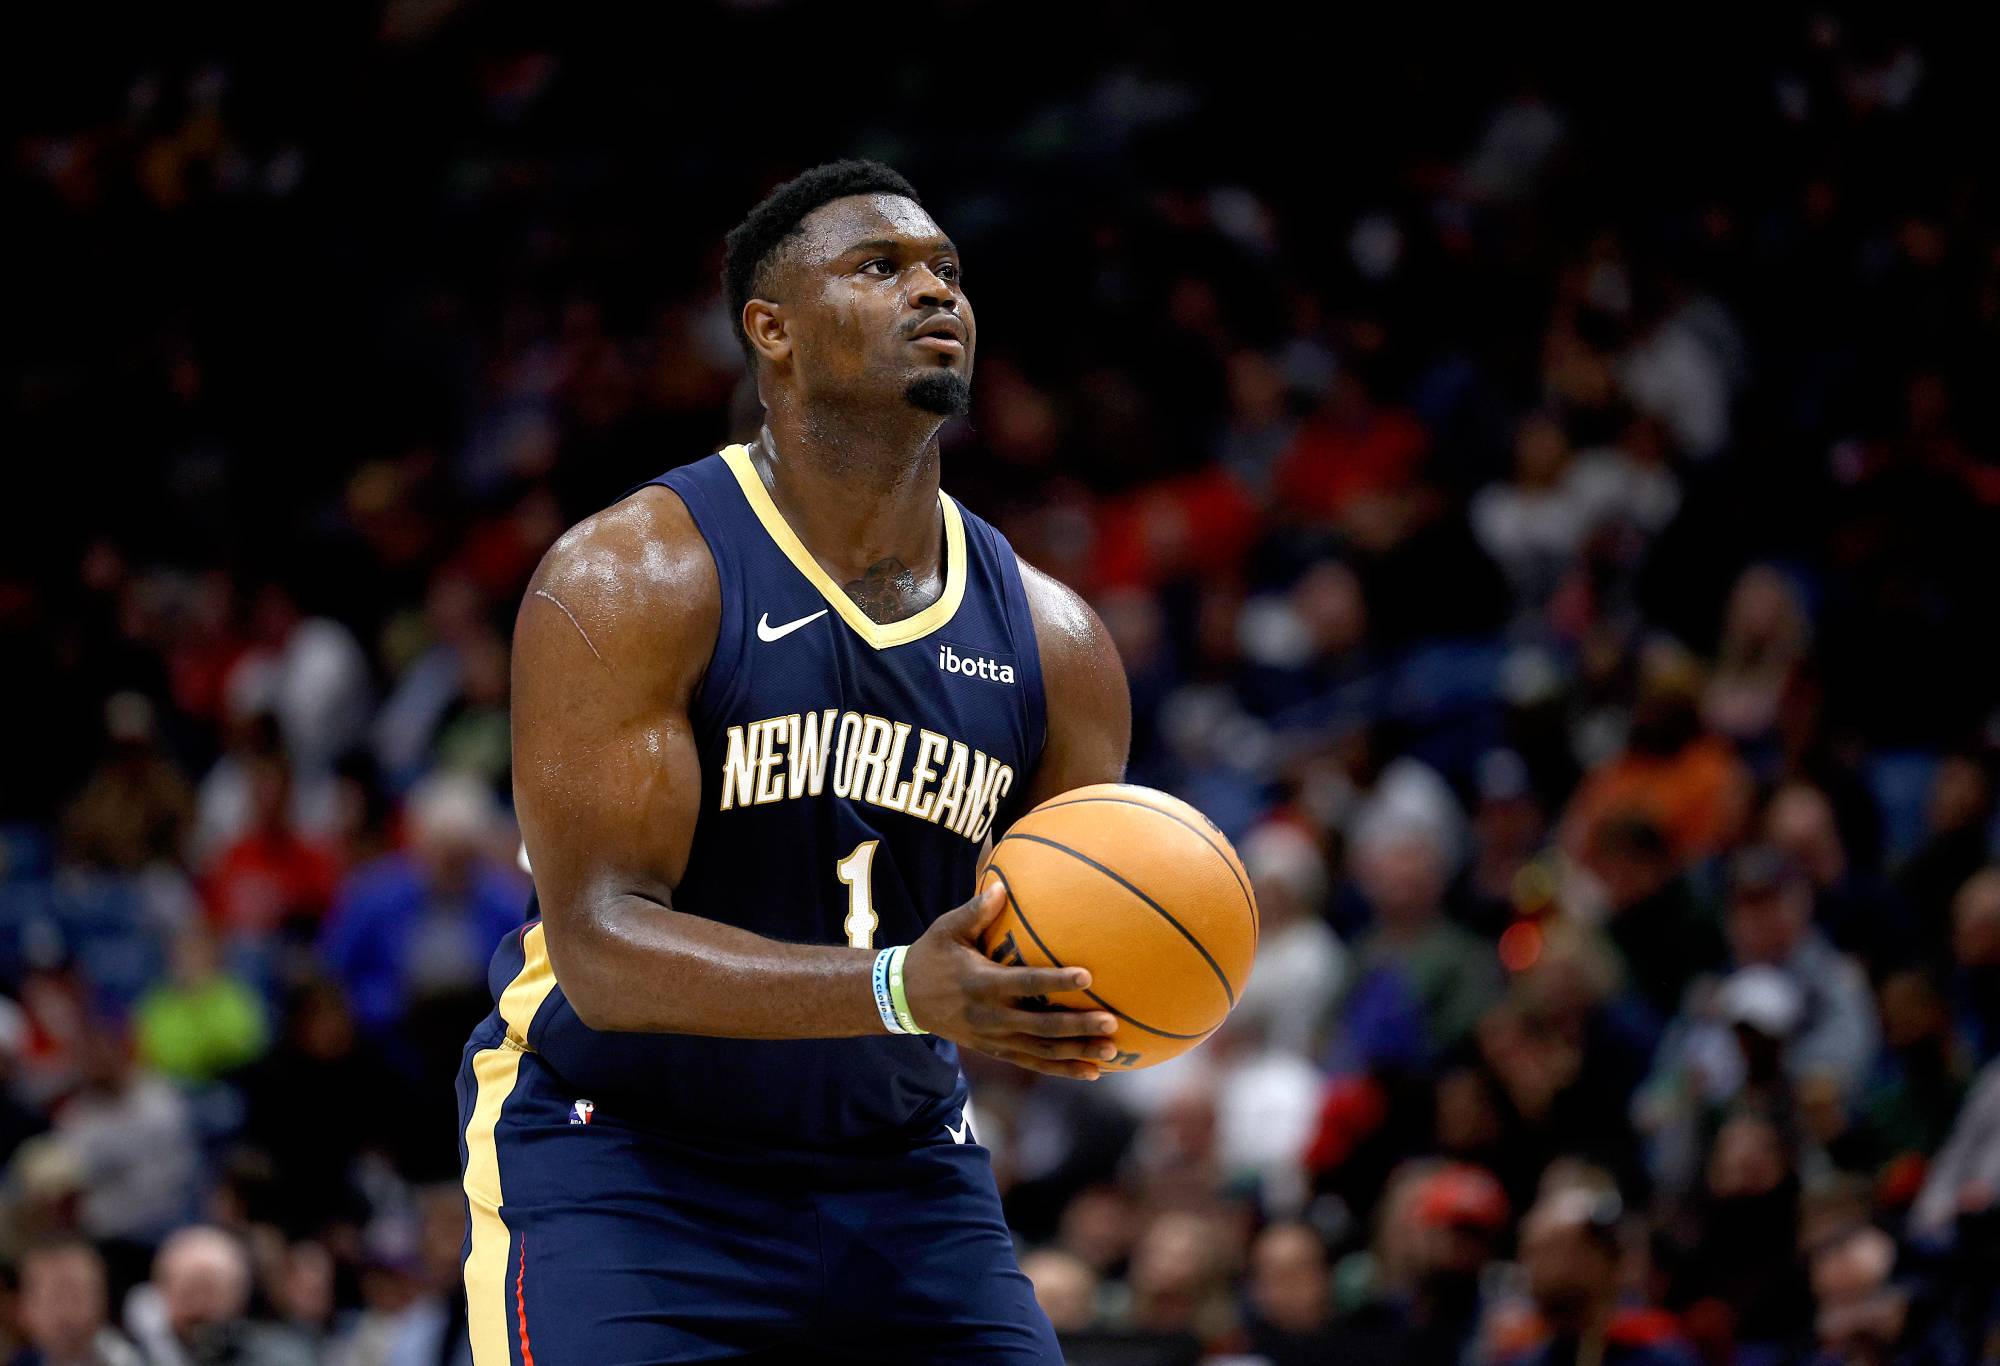 NEW ORLEANS, LOUISIANA - NOVEMBER 29: Zion Williamson #1 of the New Orleans Pelicans shoots a free throw during the fourth quarter of an NBA game at Smoothie King Center on November 29, 2023 in New Orleans, Louisiana. NOTE TO USER: User expressly acknowledges and agrees that, by downloading and or using this photograph, User is consenting to the terms and conditions of the Getty Images License Agreement. (Photo by Sean Gardner/Getty Images)